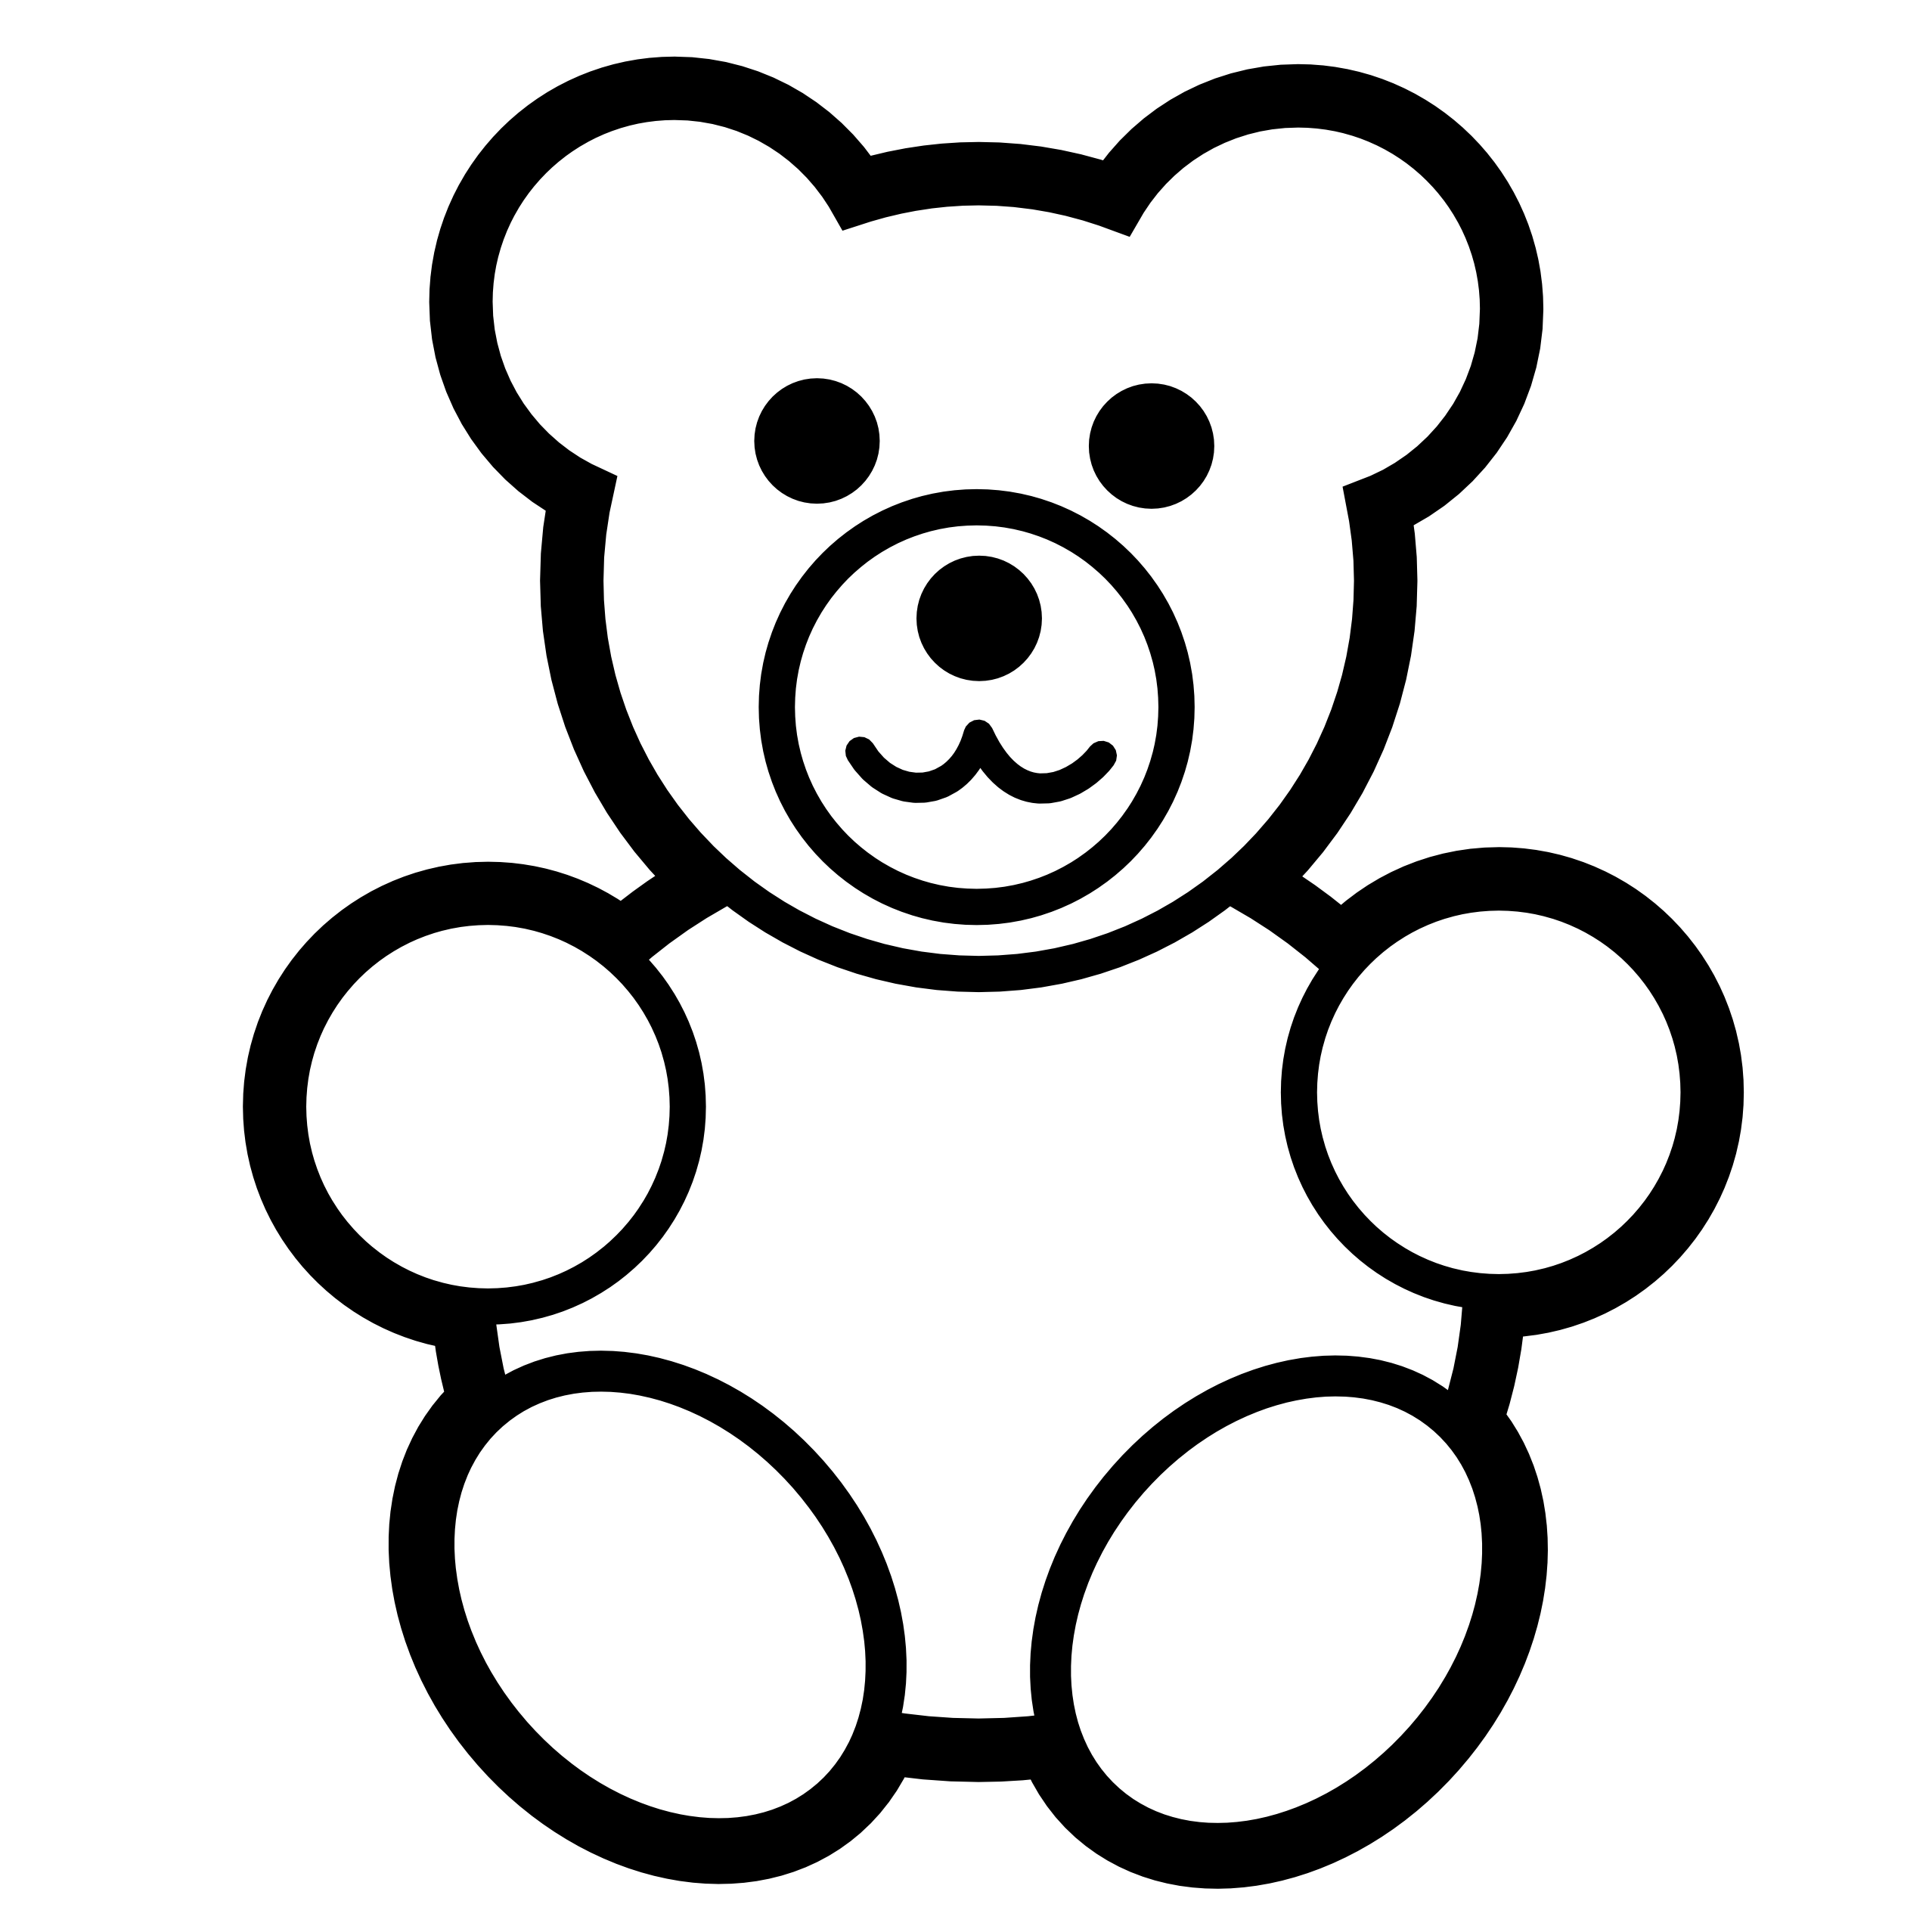 Free Teddy Bear Draw Download Free Clip Art Free Clip Art On Clipart Library